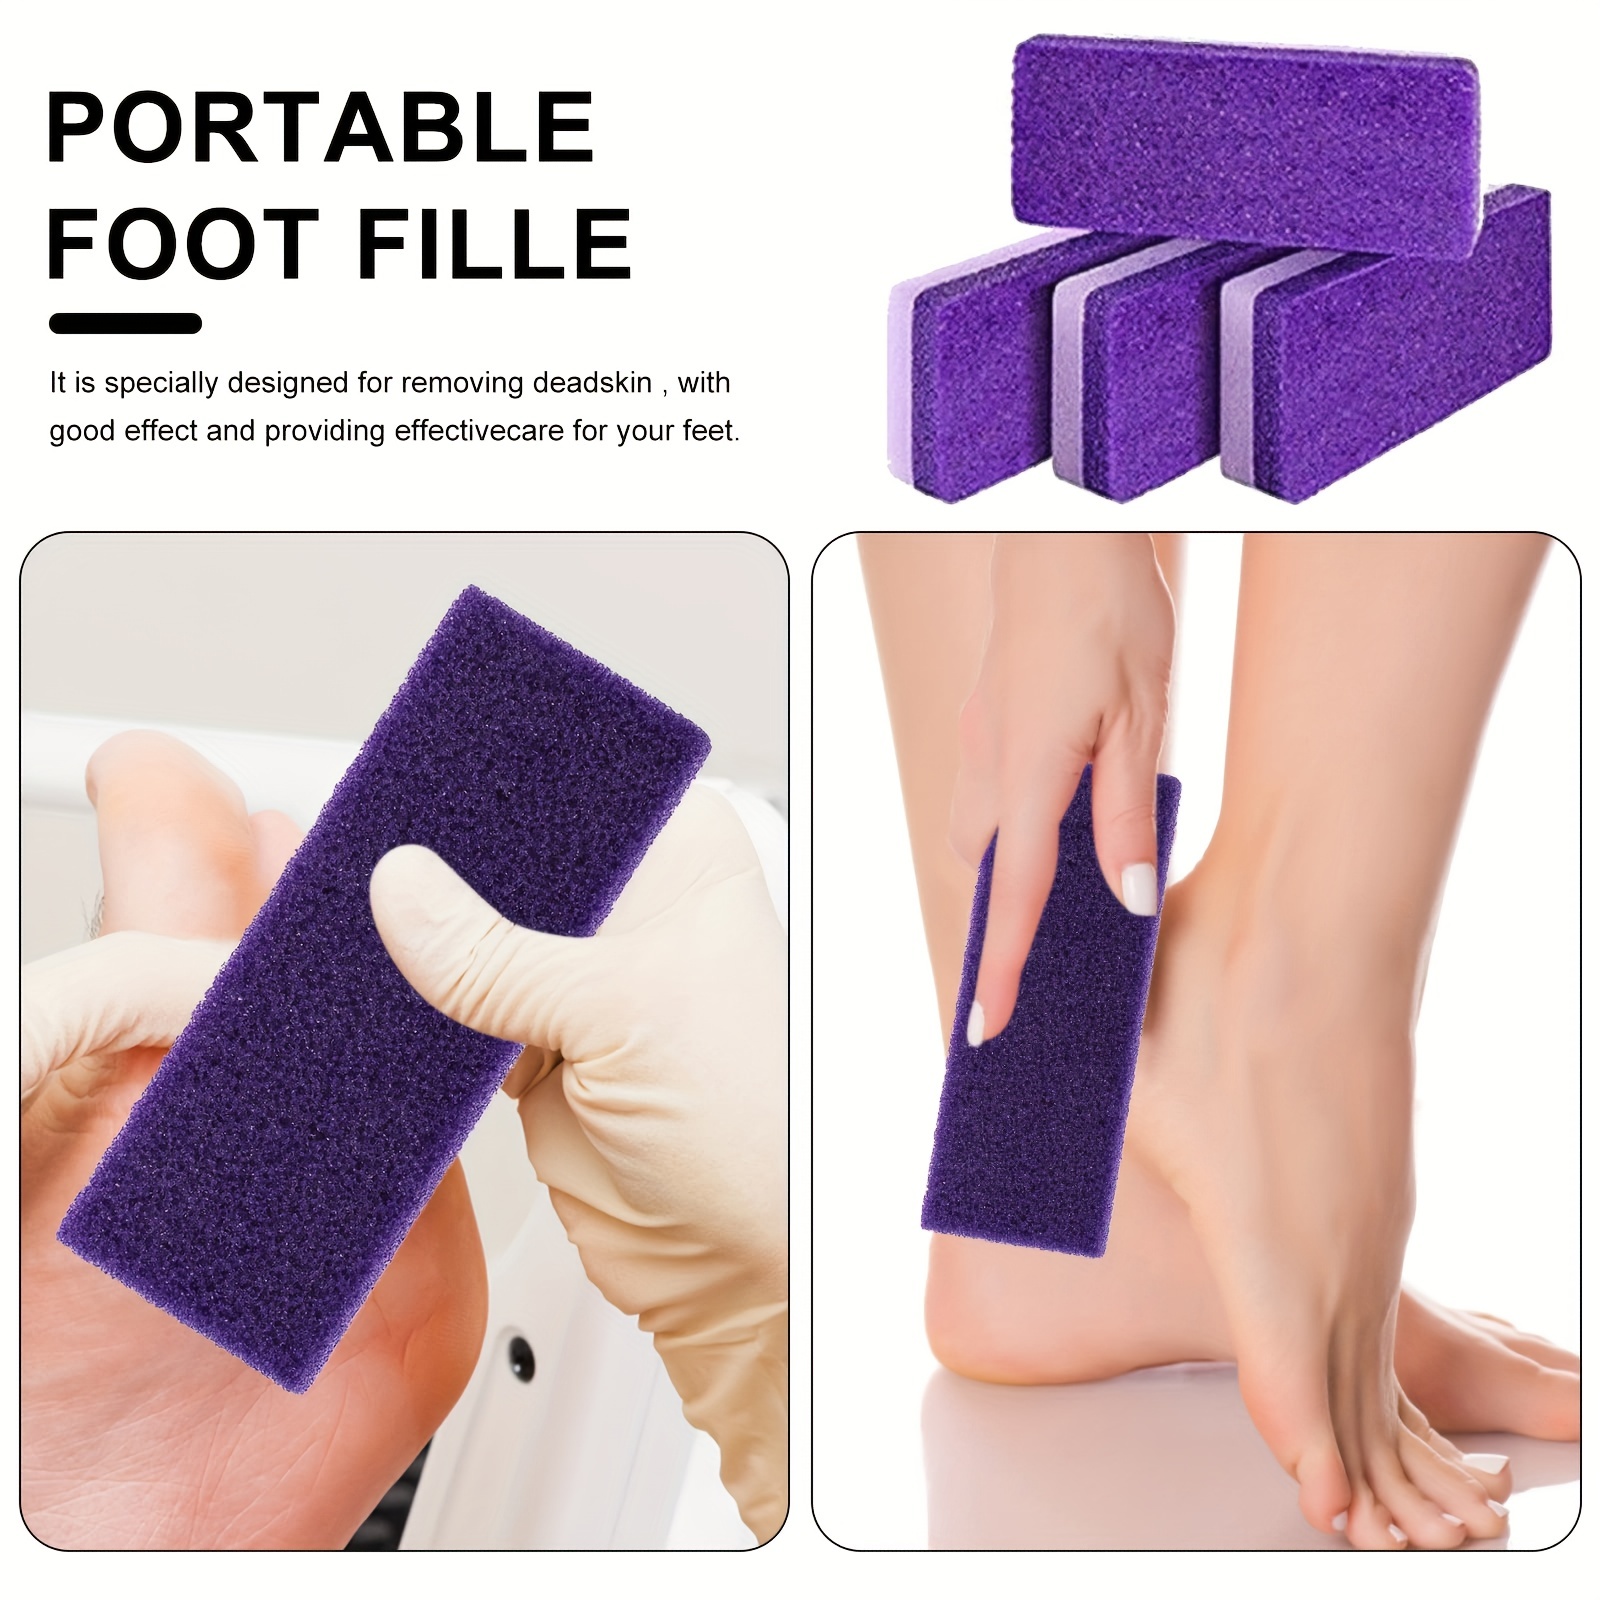 Foot Pumice Stone for Feet, 2 in 1 Double Sided Hard Skin Callus Remover  Scrubber Pedicure Exfoliator Tool for Dead Skin Pack of 6